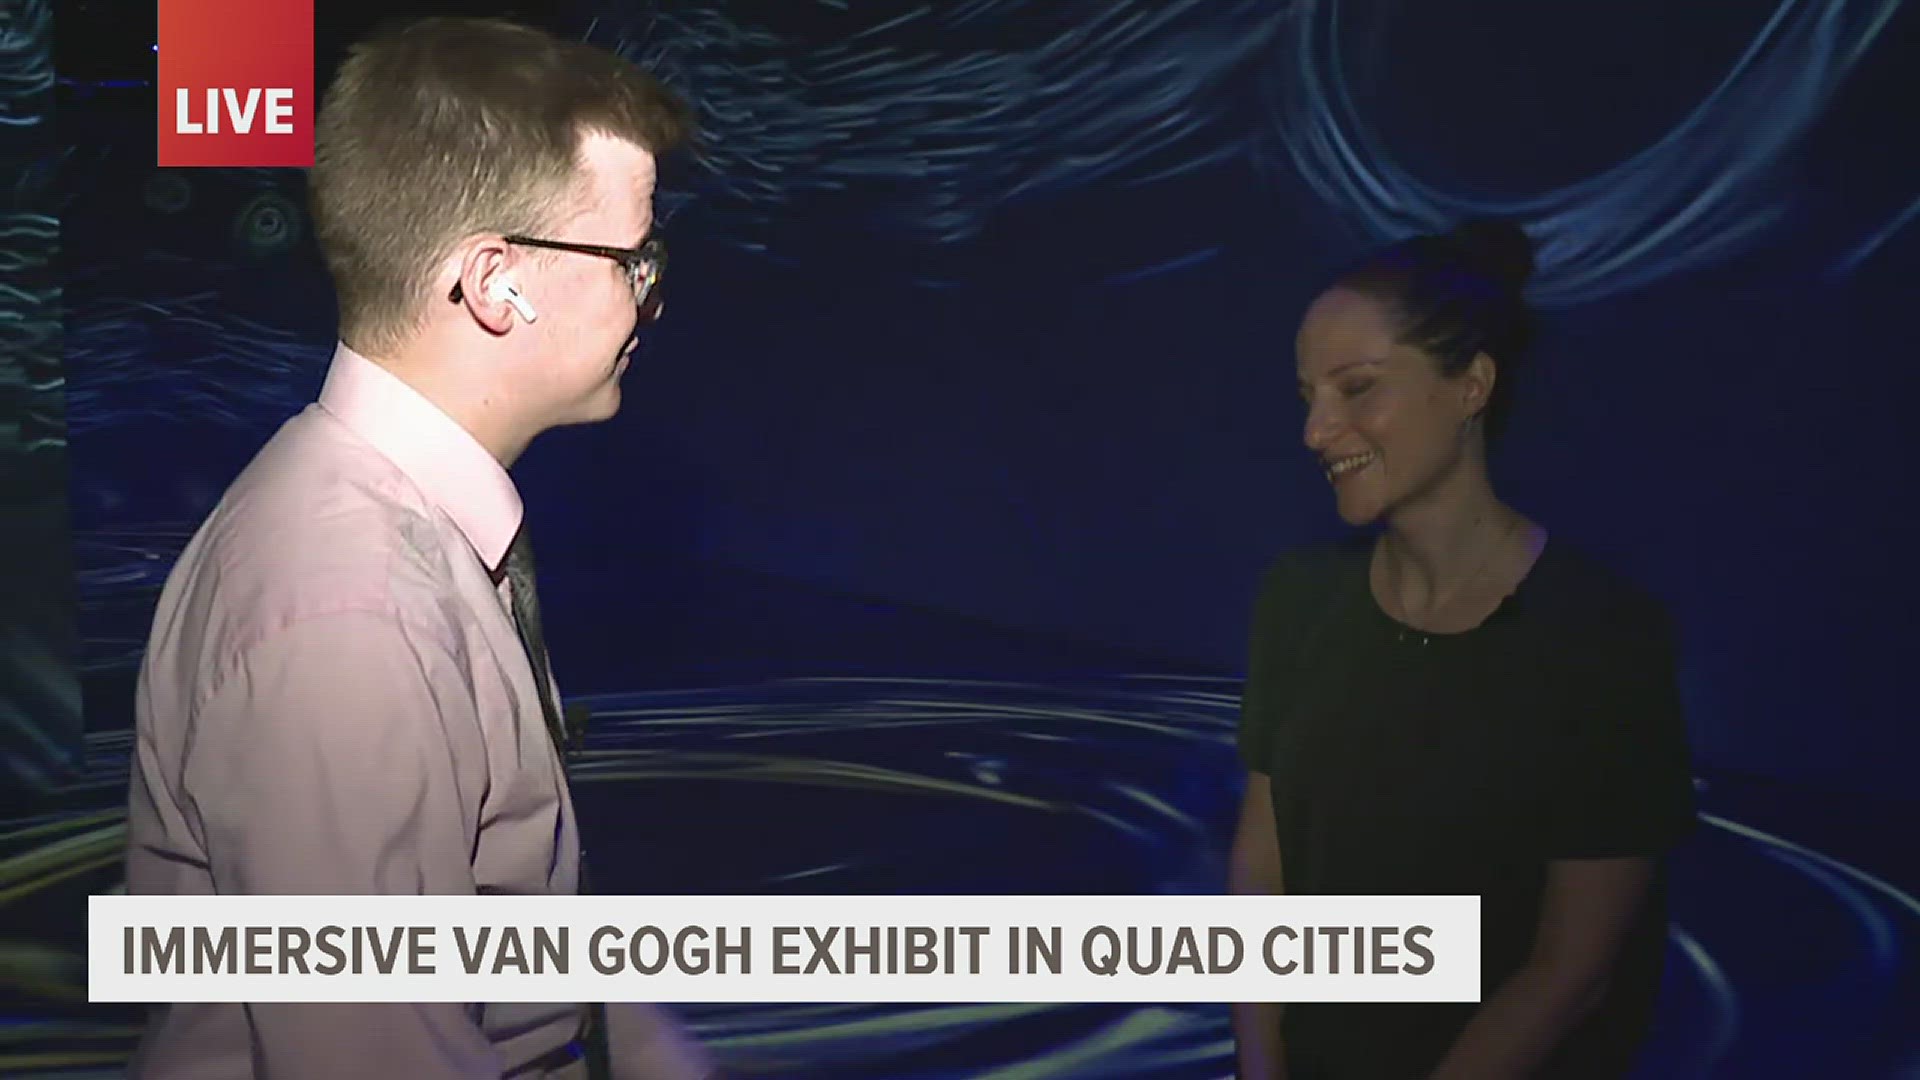 People will be able to immerse themselves in Vincent Van Gogh's artwork to, as organizers say, become one with his paintings.